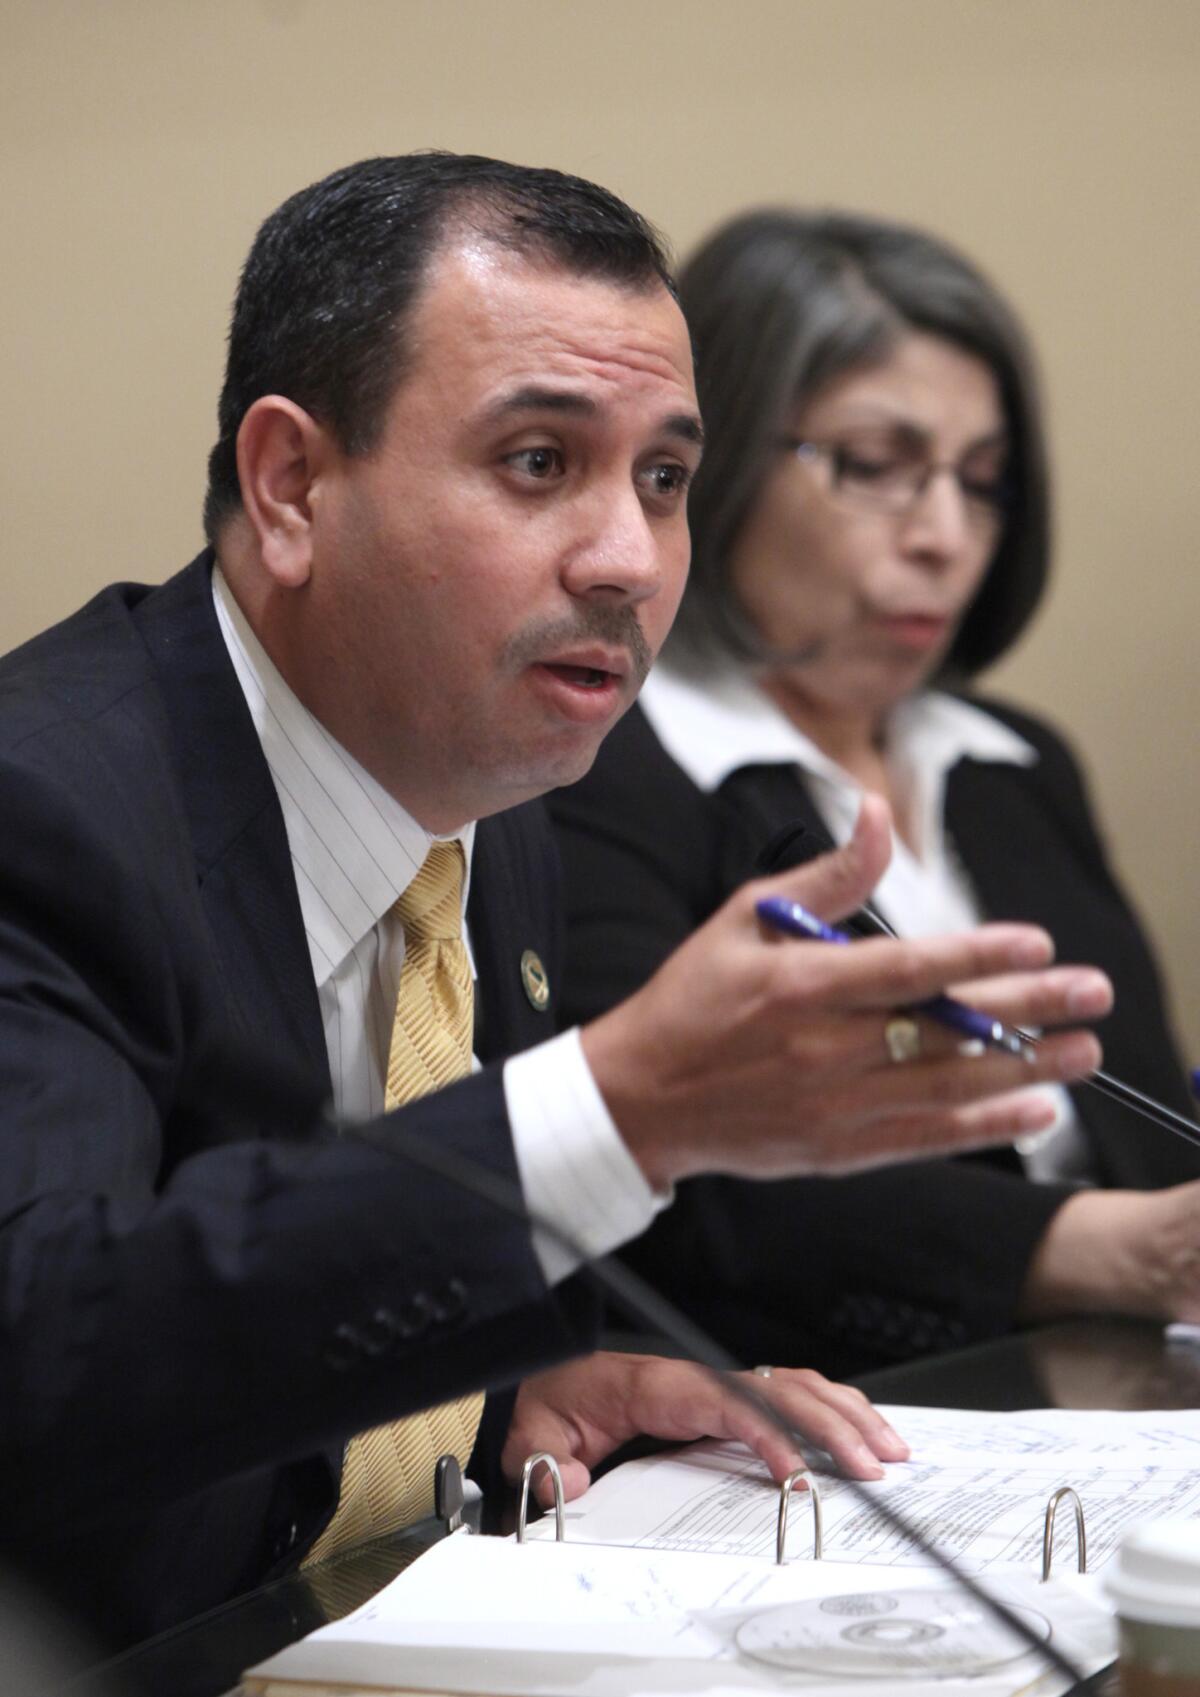 State Sen. Tony Mendoza, D-Artesia, wants to expand the Los Angeles County Board of Supervisors from five to seven members. Rich Pedroncelli / Associated Press